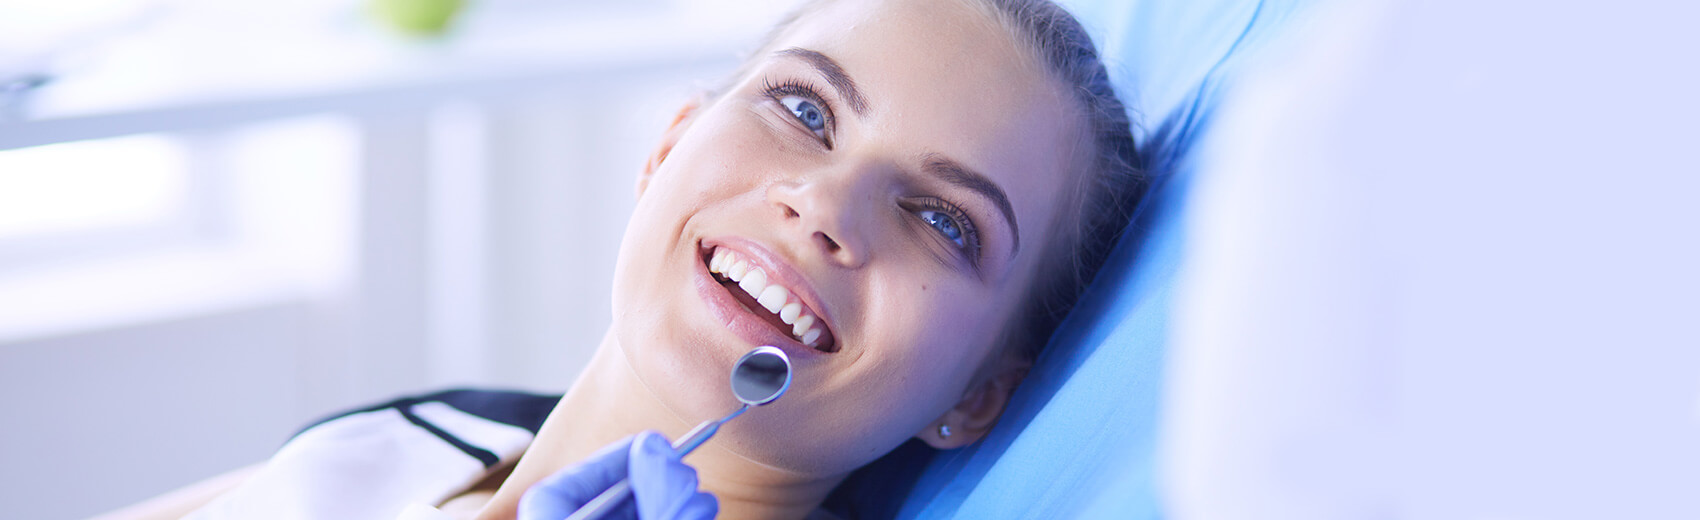 High-quality Dental Services at Affordable Rates in Naperville, Illinois!